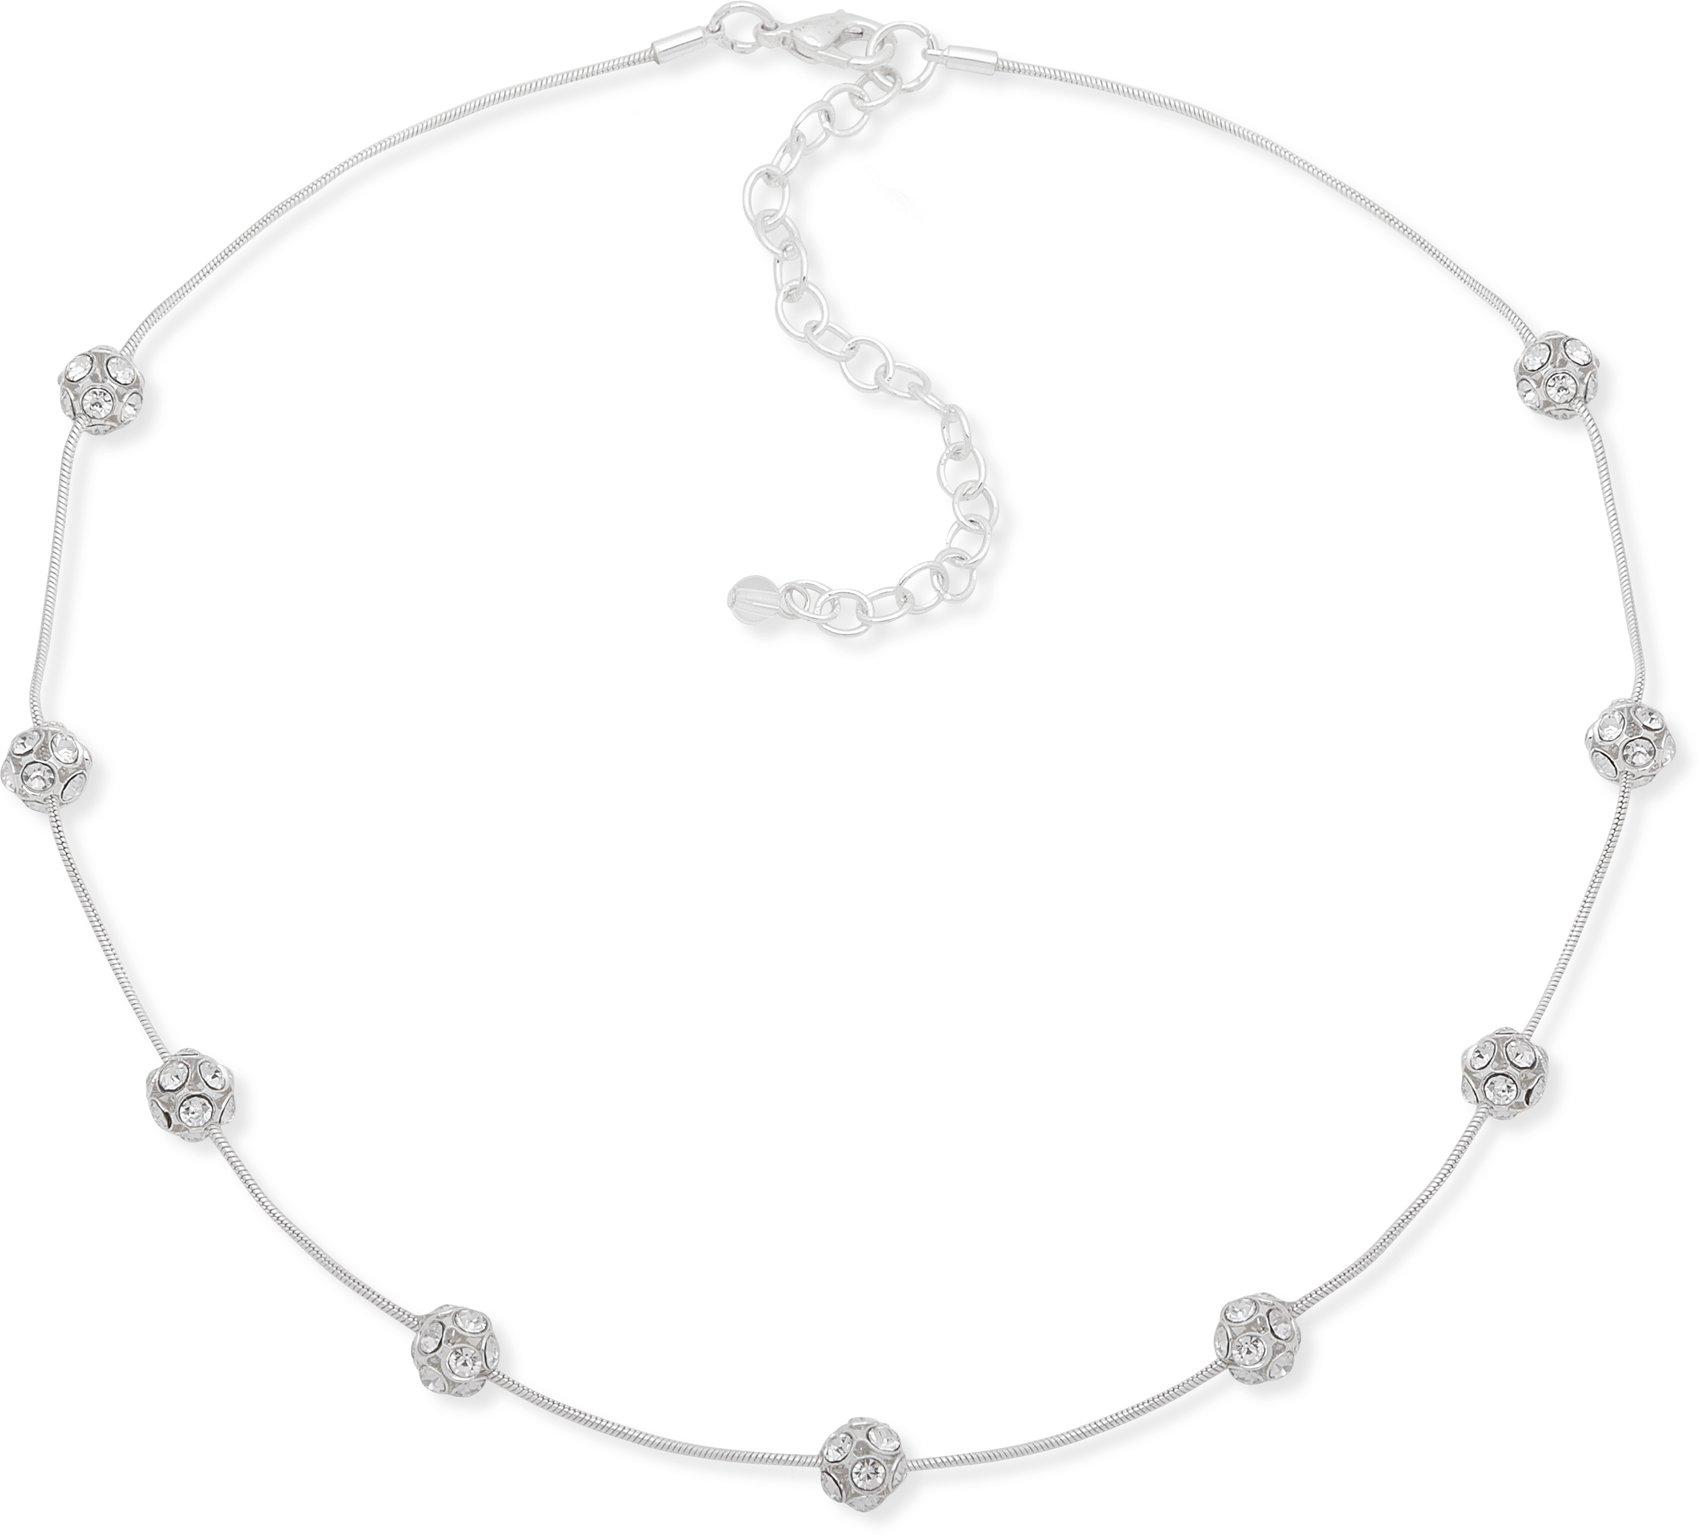 You're Invited Silver Tone Pave Ball Collar Necklace